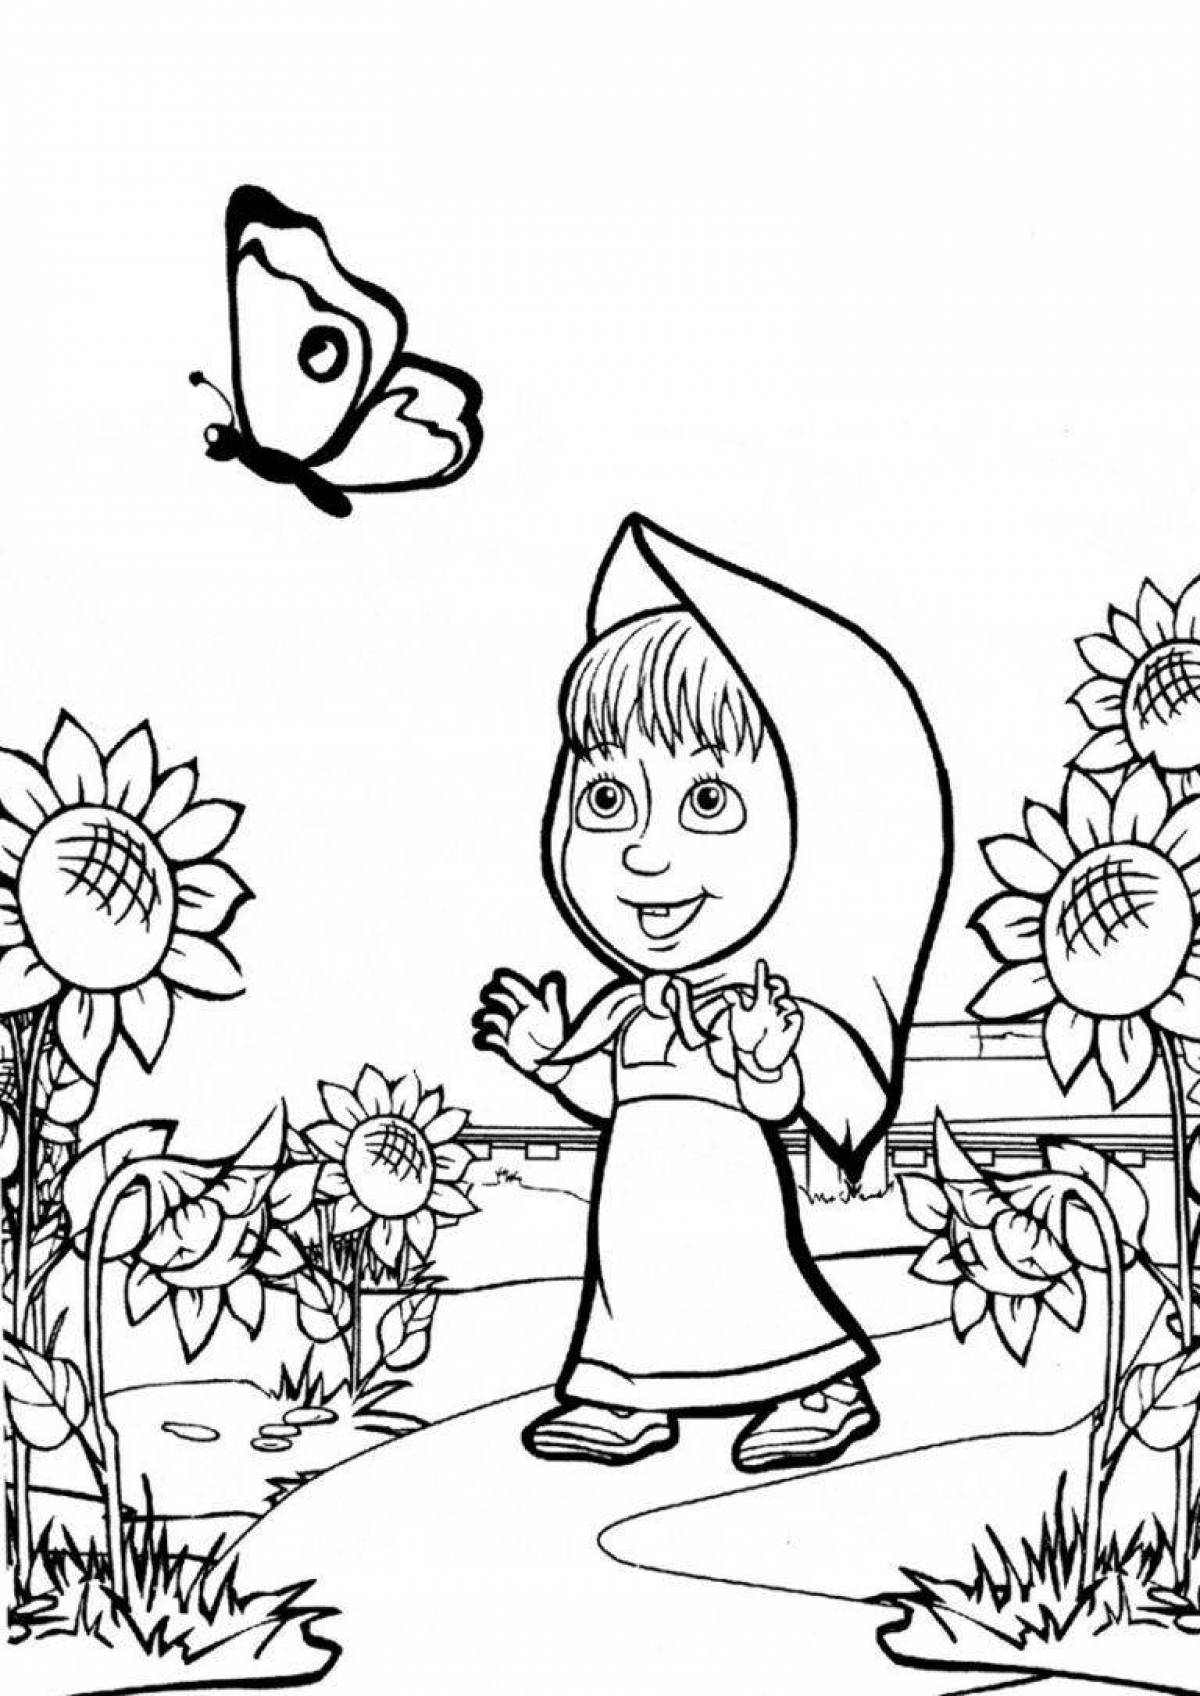 Colorful bright Masha and the bear coloring book